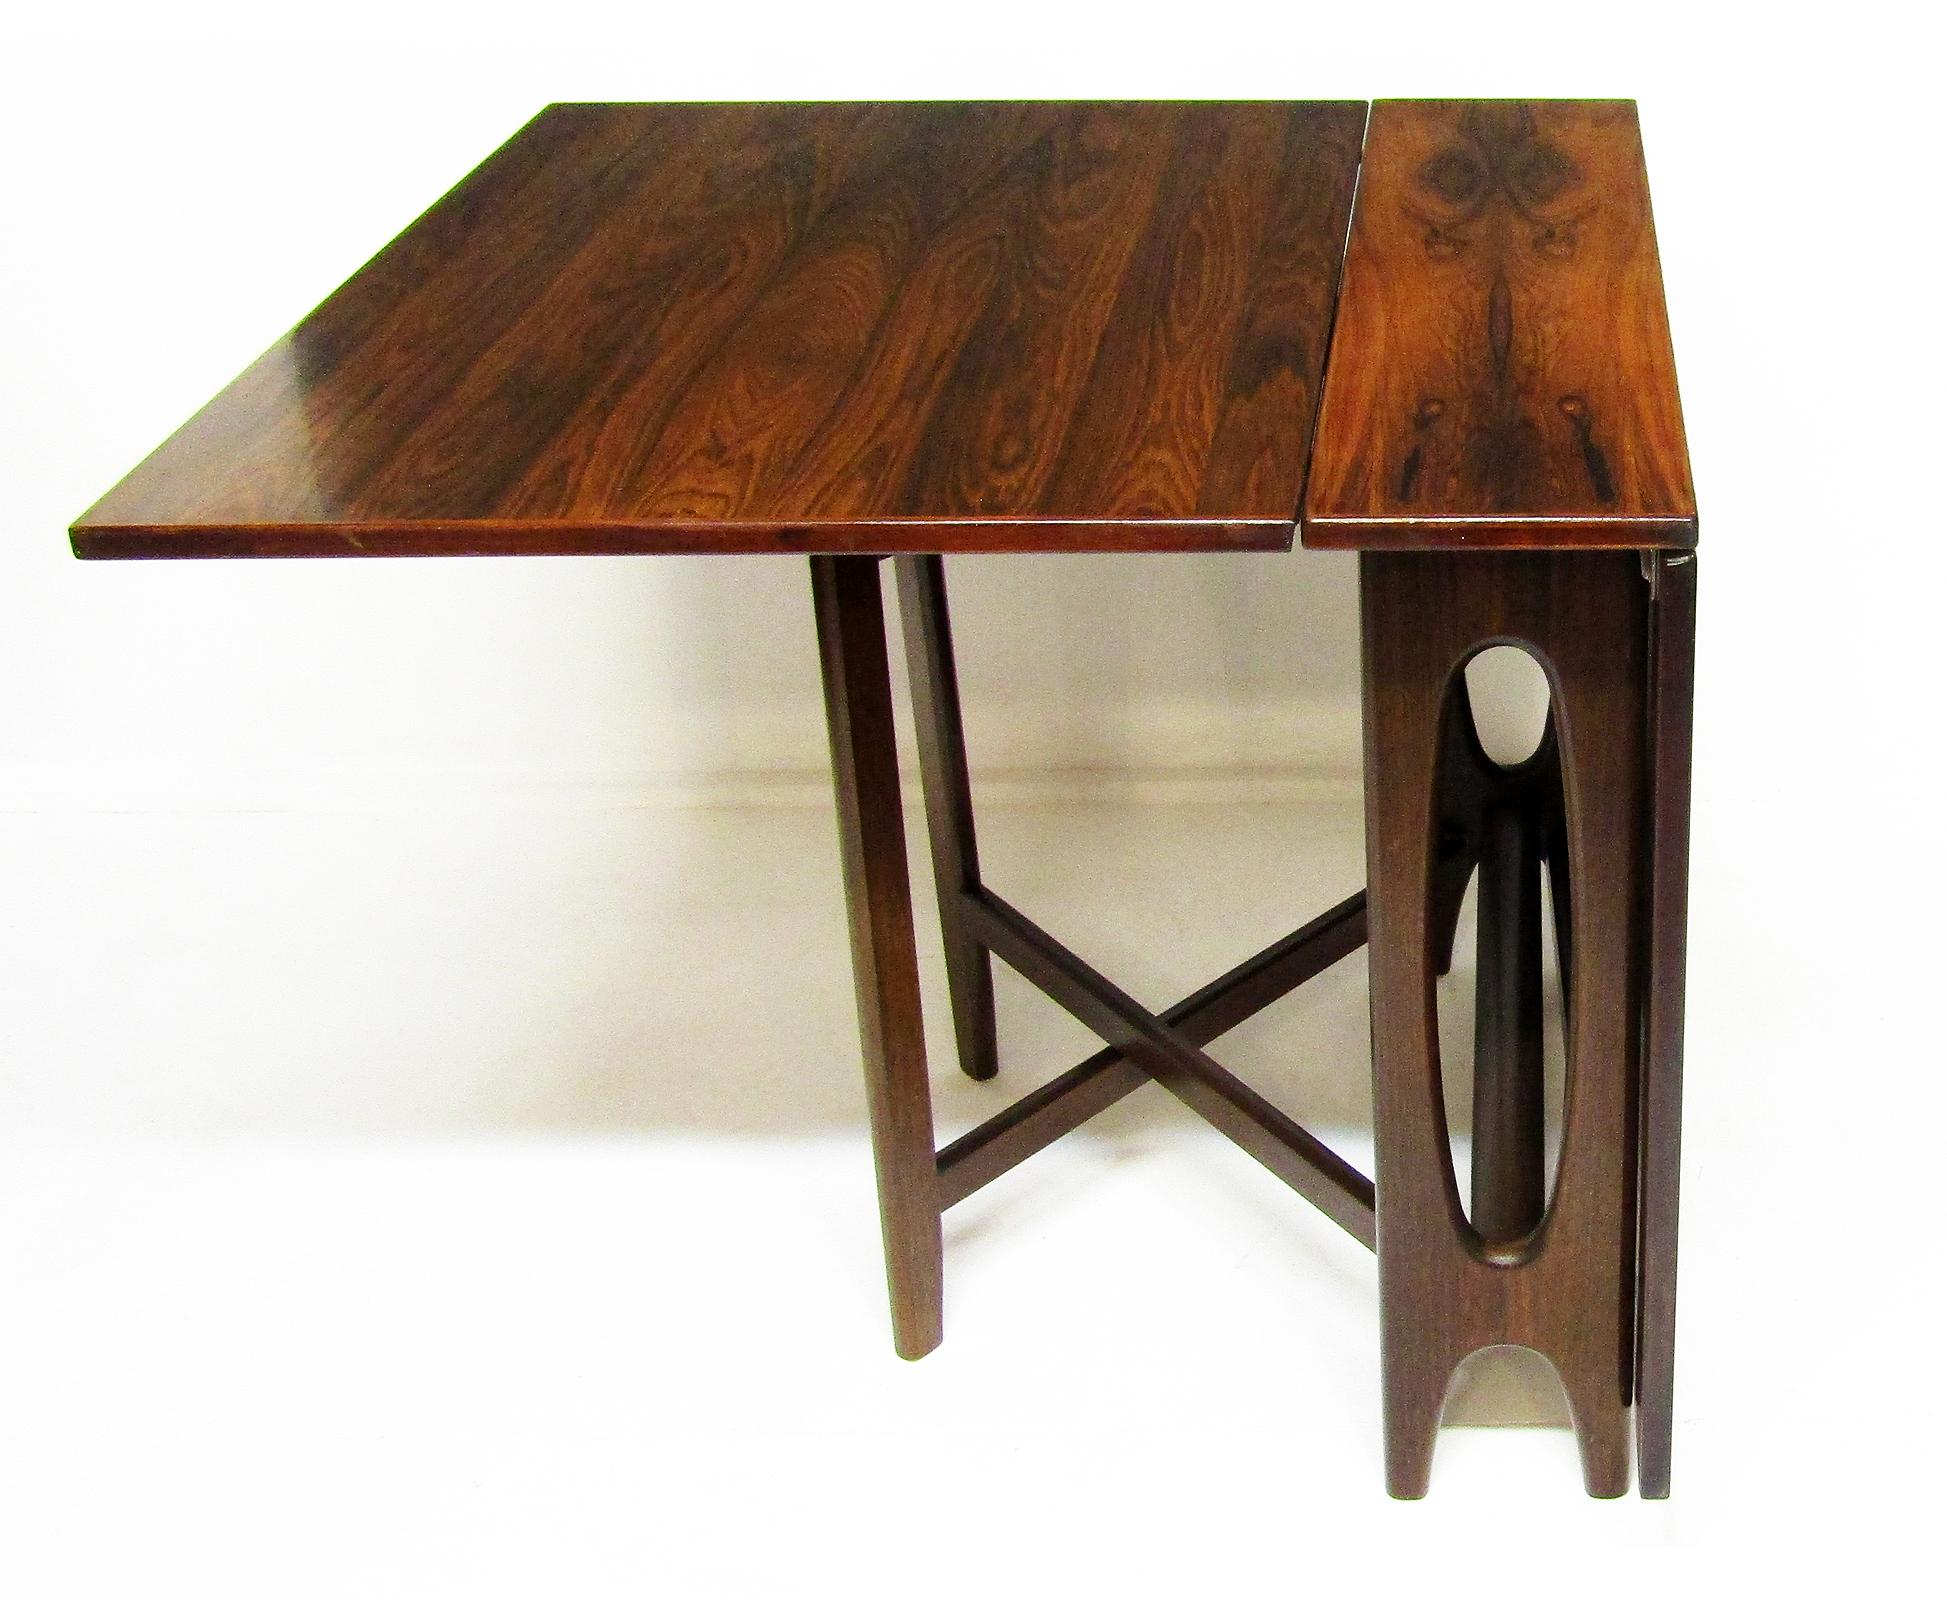 Mid-Century Modern 1970s Scandinavian Drop-Leaf Rio Rosewood Extending Dining Table by Bendt Winge For Sale